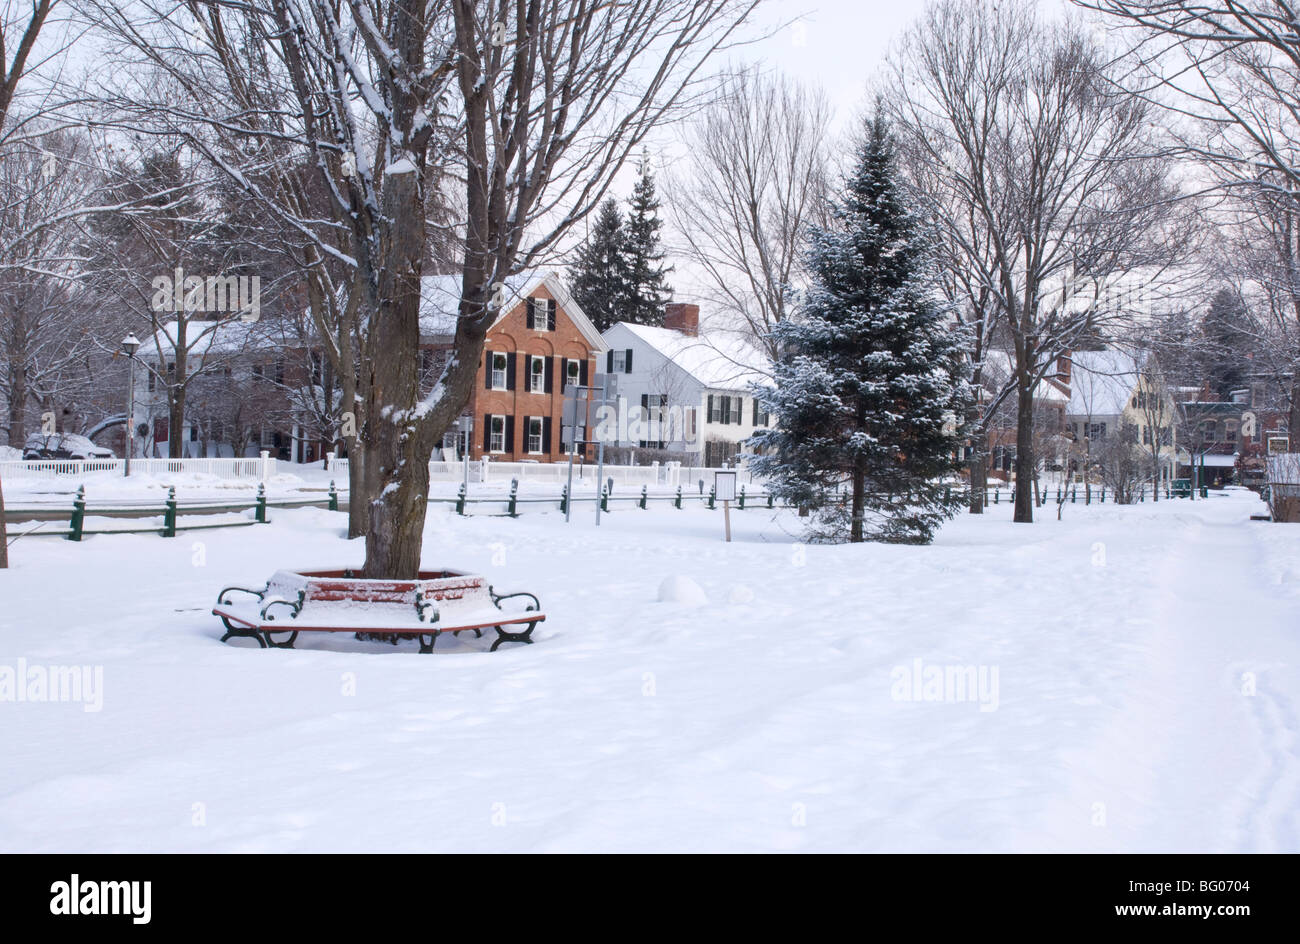 The Village Green covered with snow, Woodstock, Vermont, New England, United States of America, North America Stock Photo